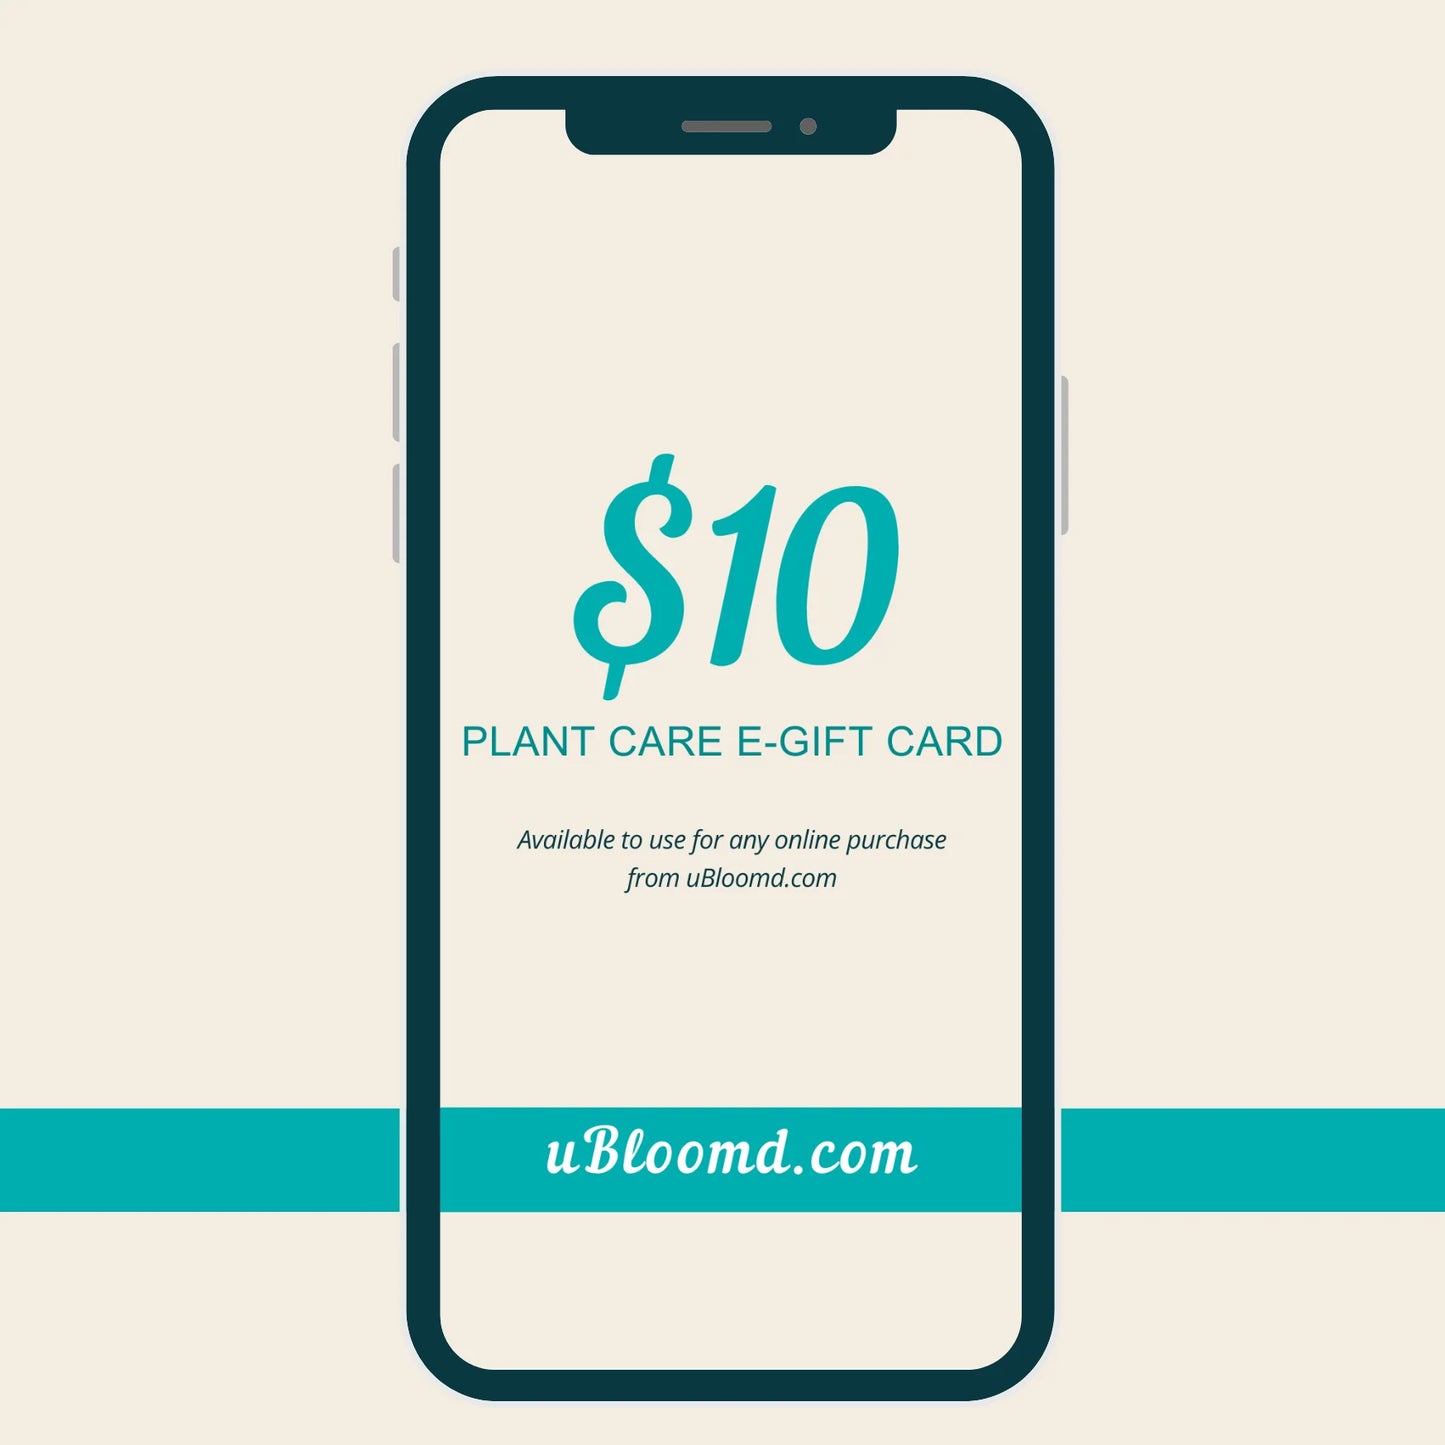 Gifted: $10 Plant Care e-Gift Card